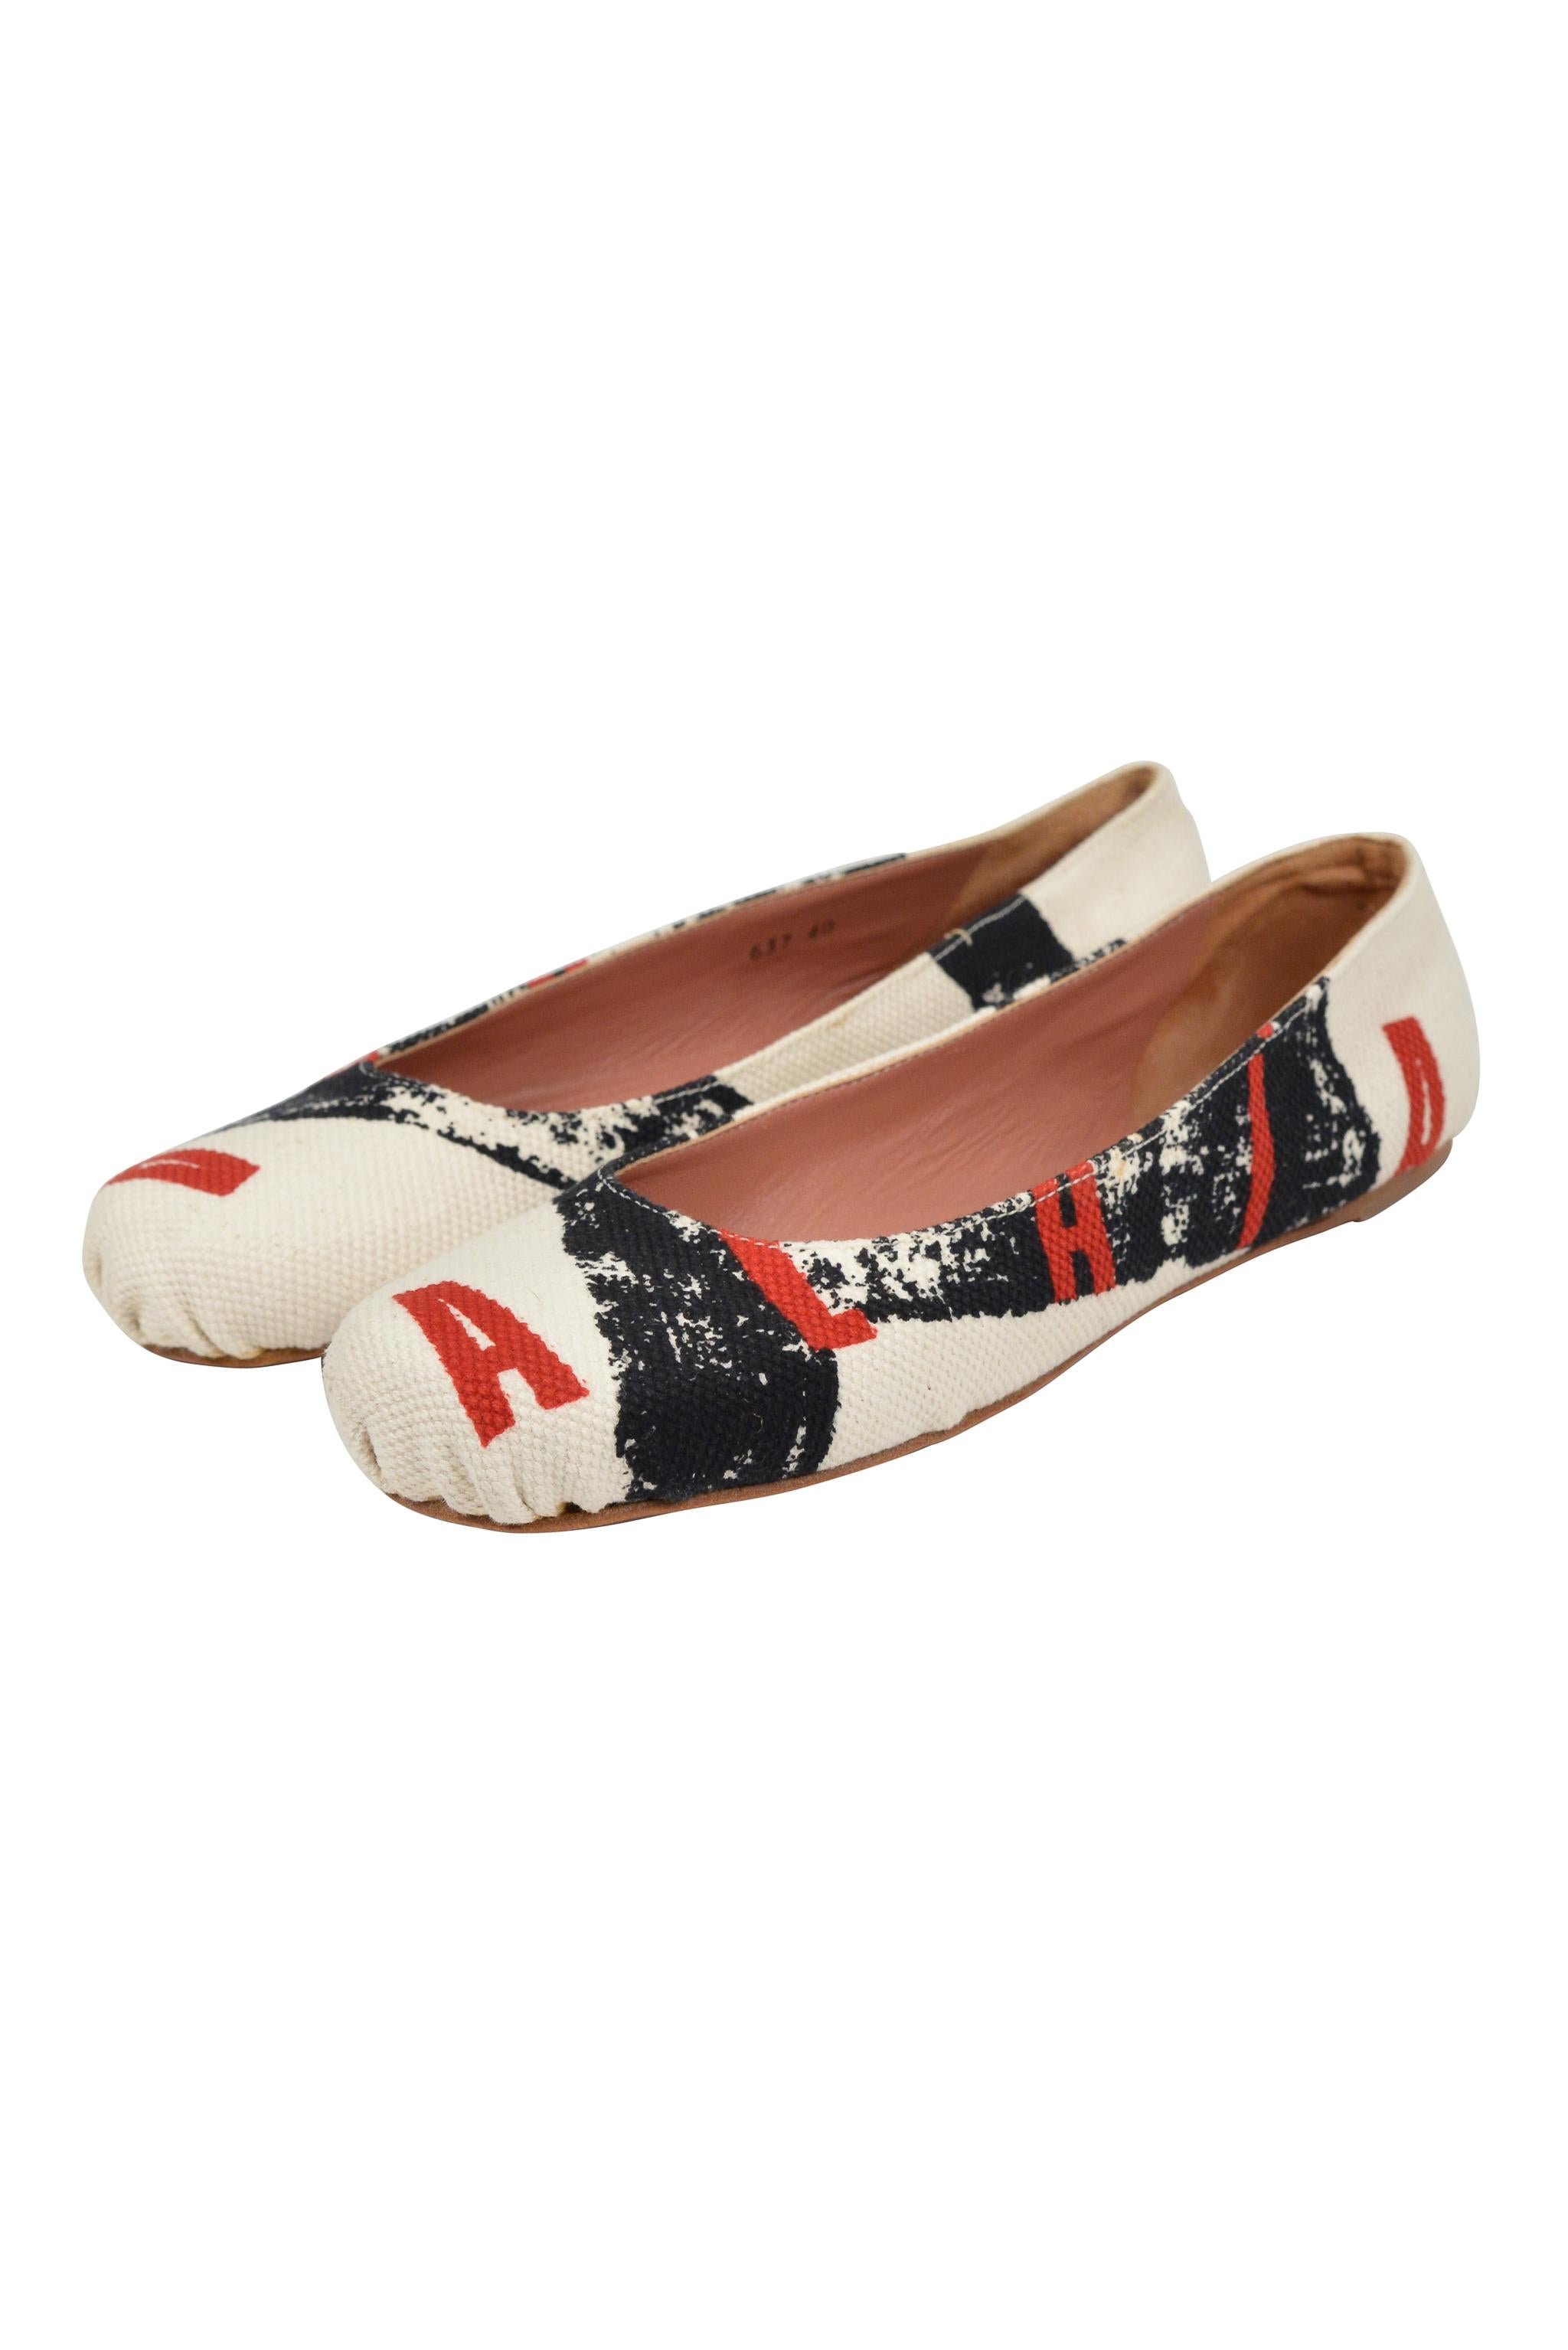 Alaia Logo Print Ballerina Flats 2000S In Excellent Condition For Sale In Los Angeles, CA